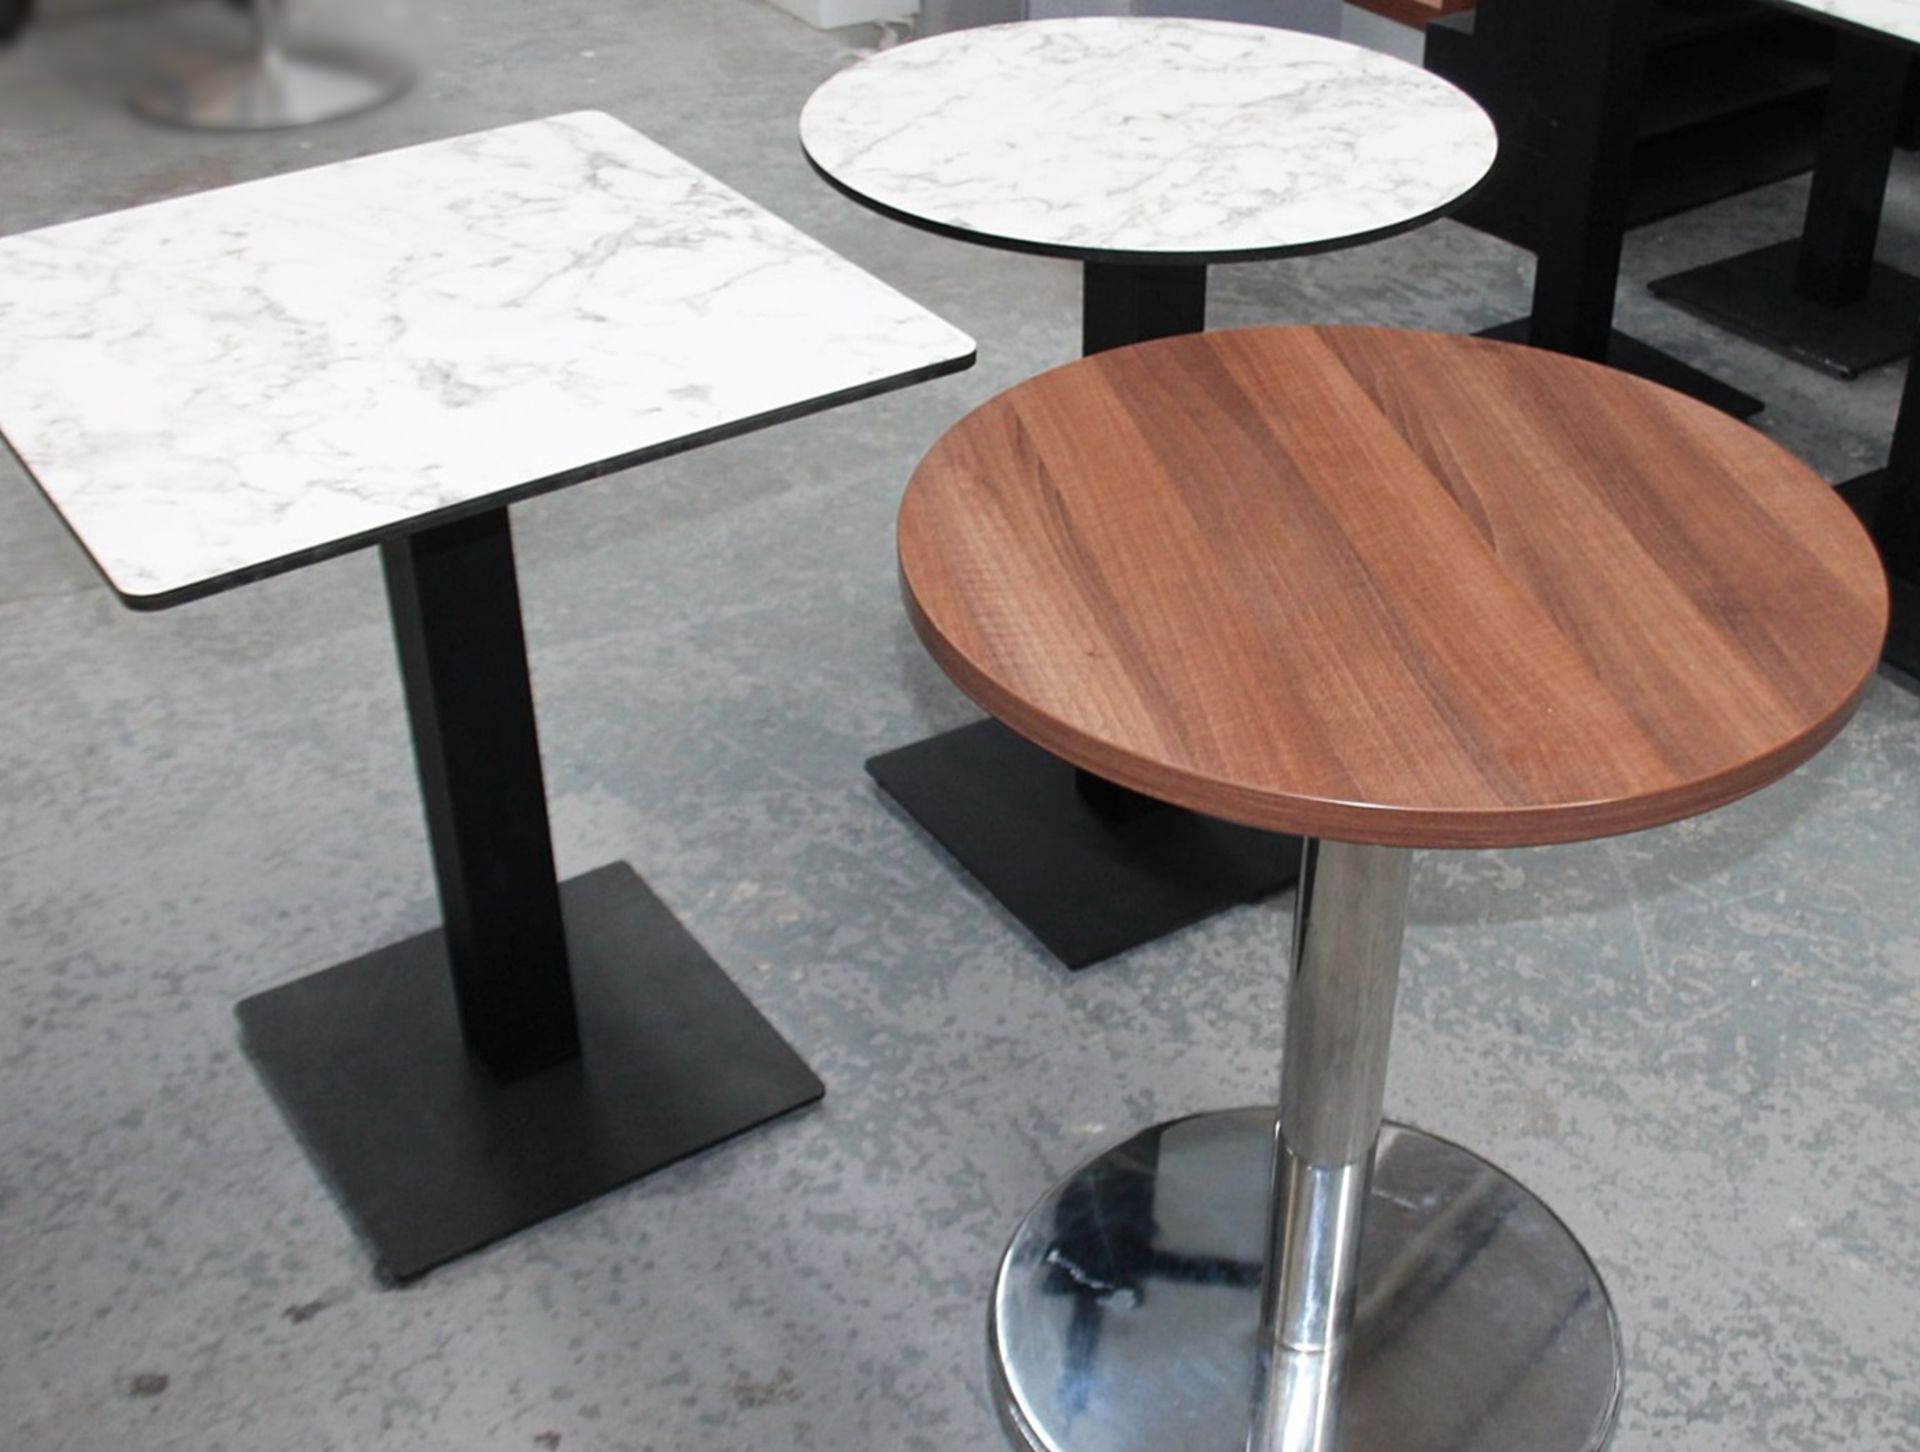 3 x Assorted Bistro Tables With Fixed Robust Metal Bases - CL987 - Ref: G/IT - Location: - Image 2 of 5